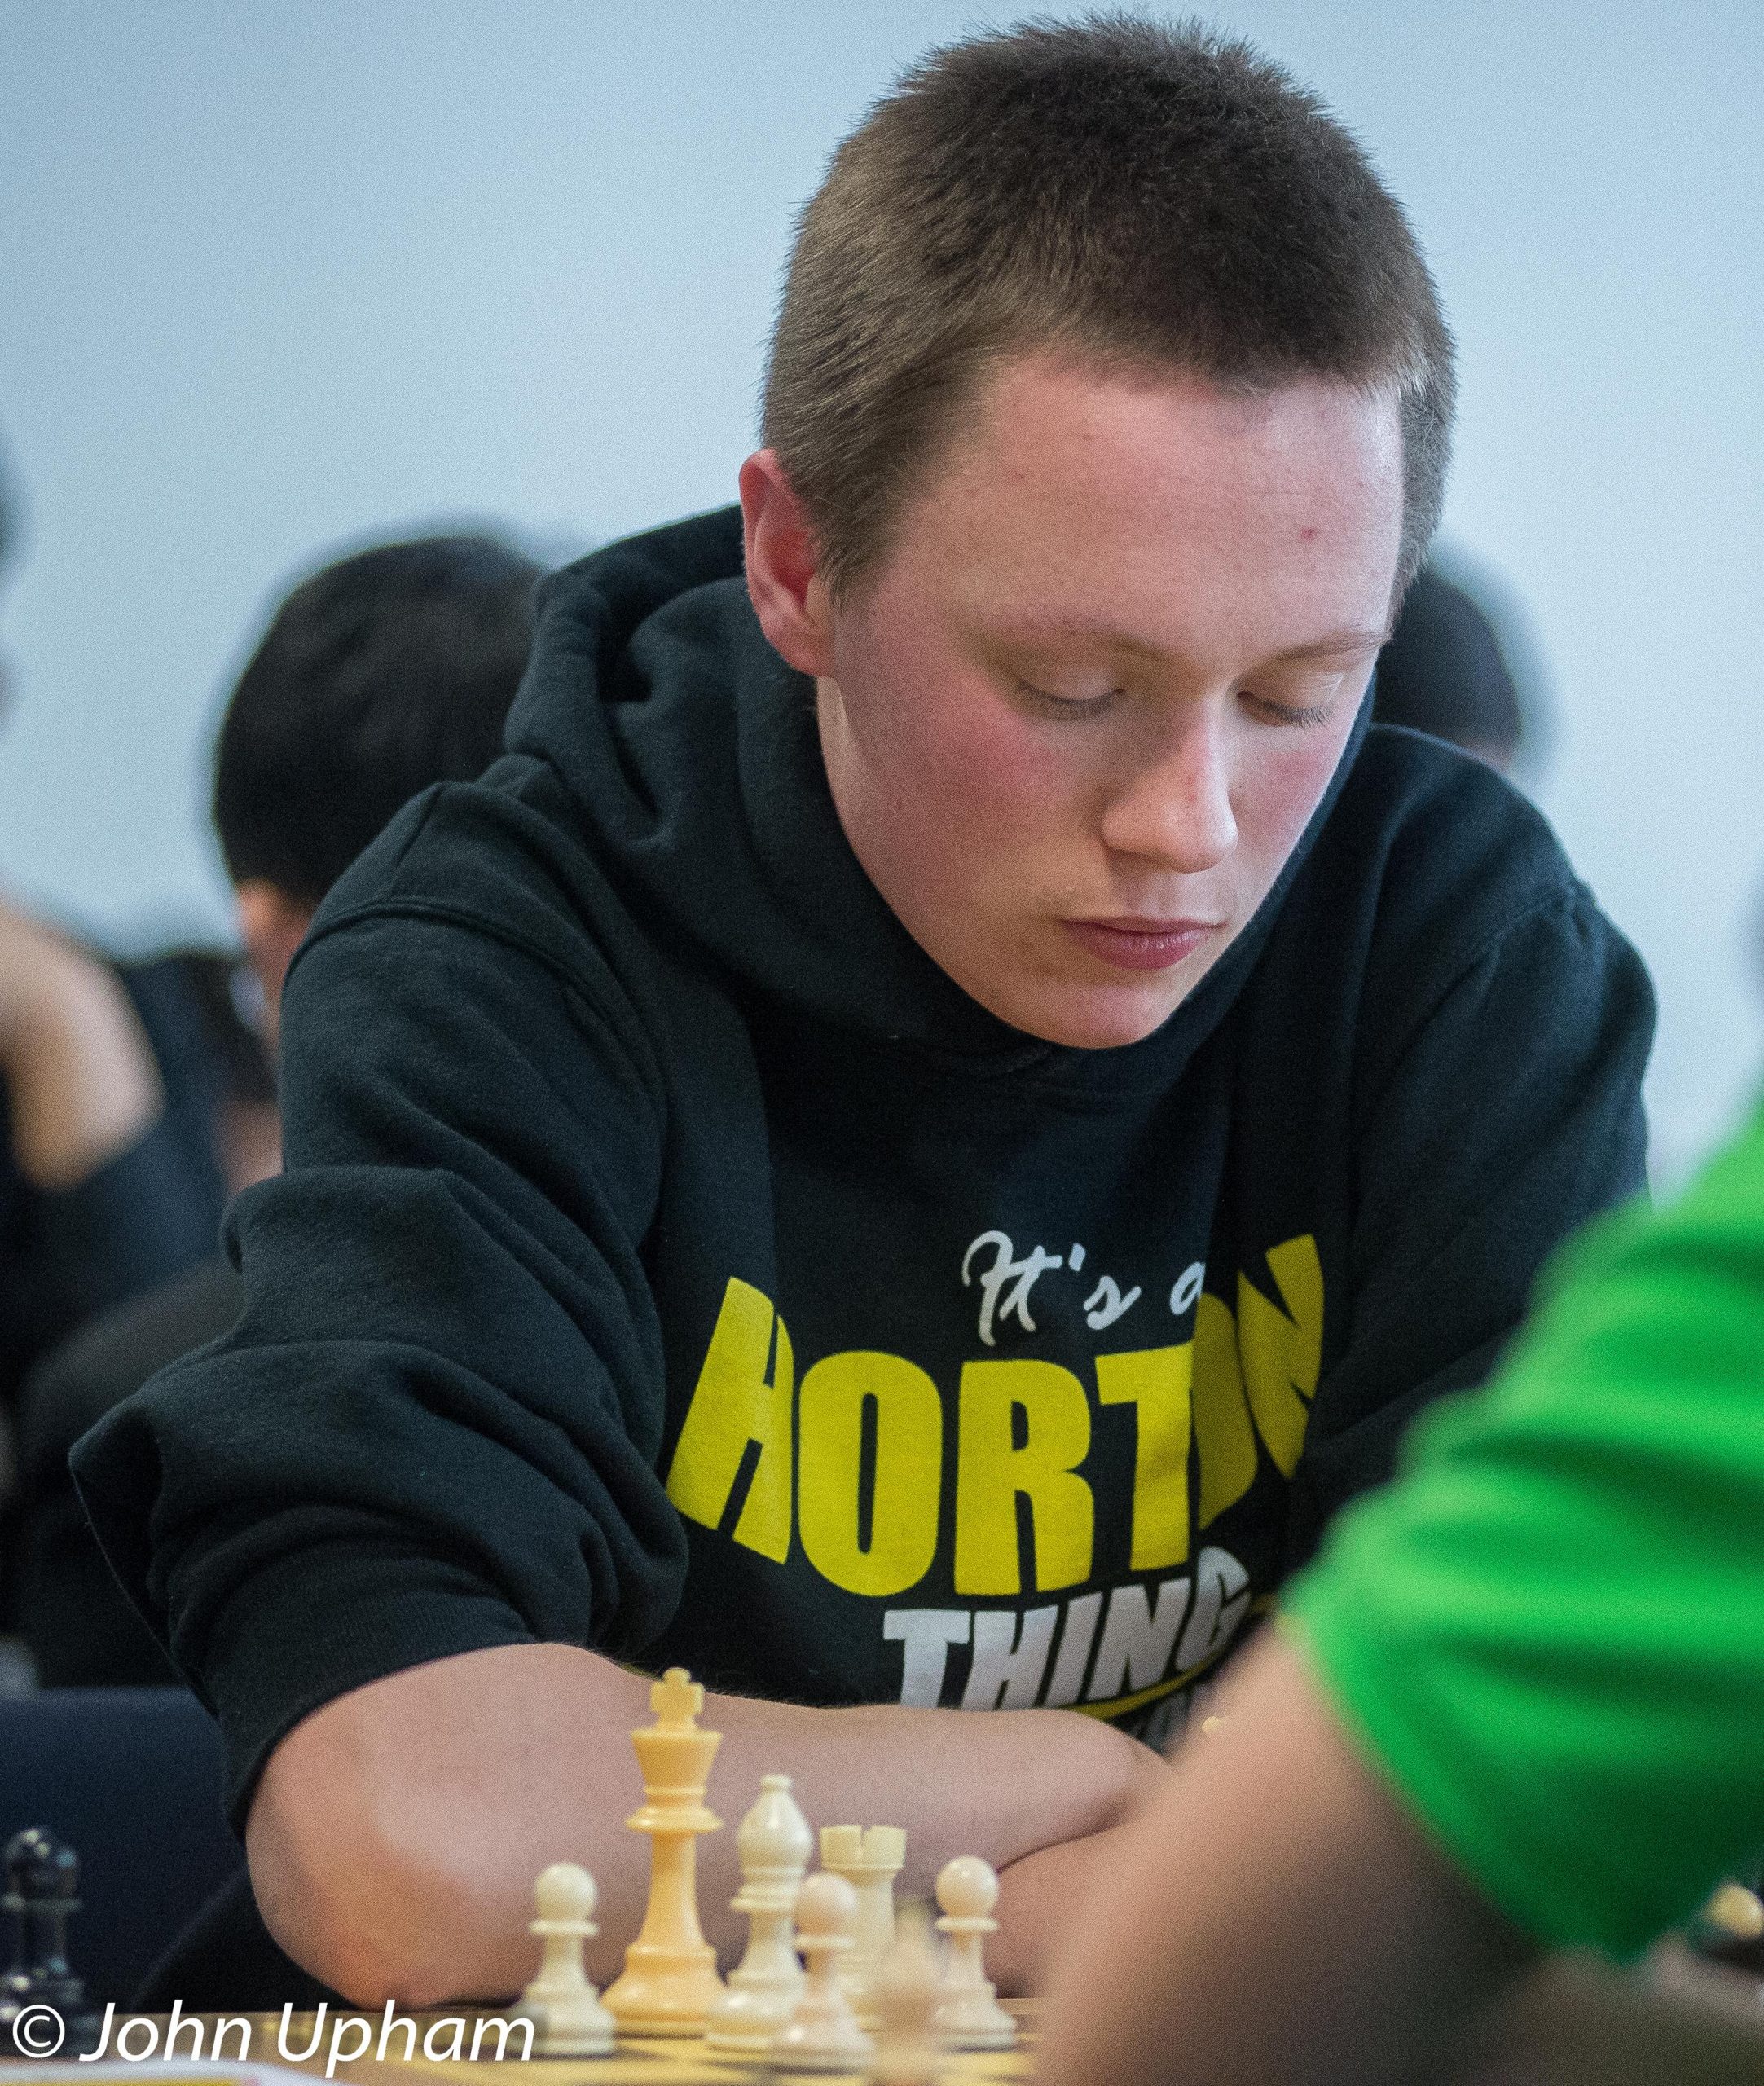 Andrew Horton at the 2014 Team Chess Challenge at Imperial College. Courtesy of John Upham Photography